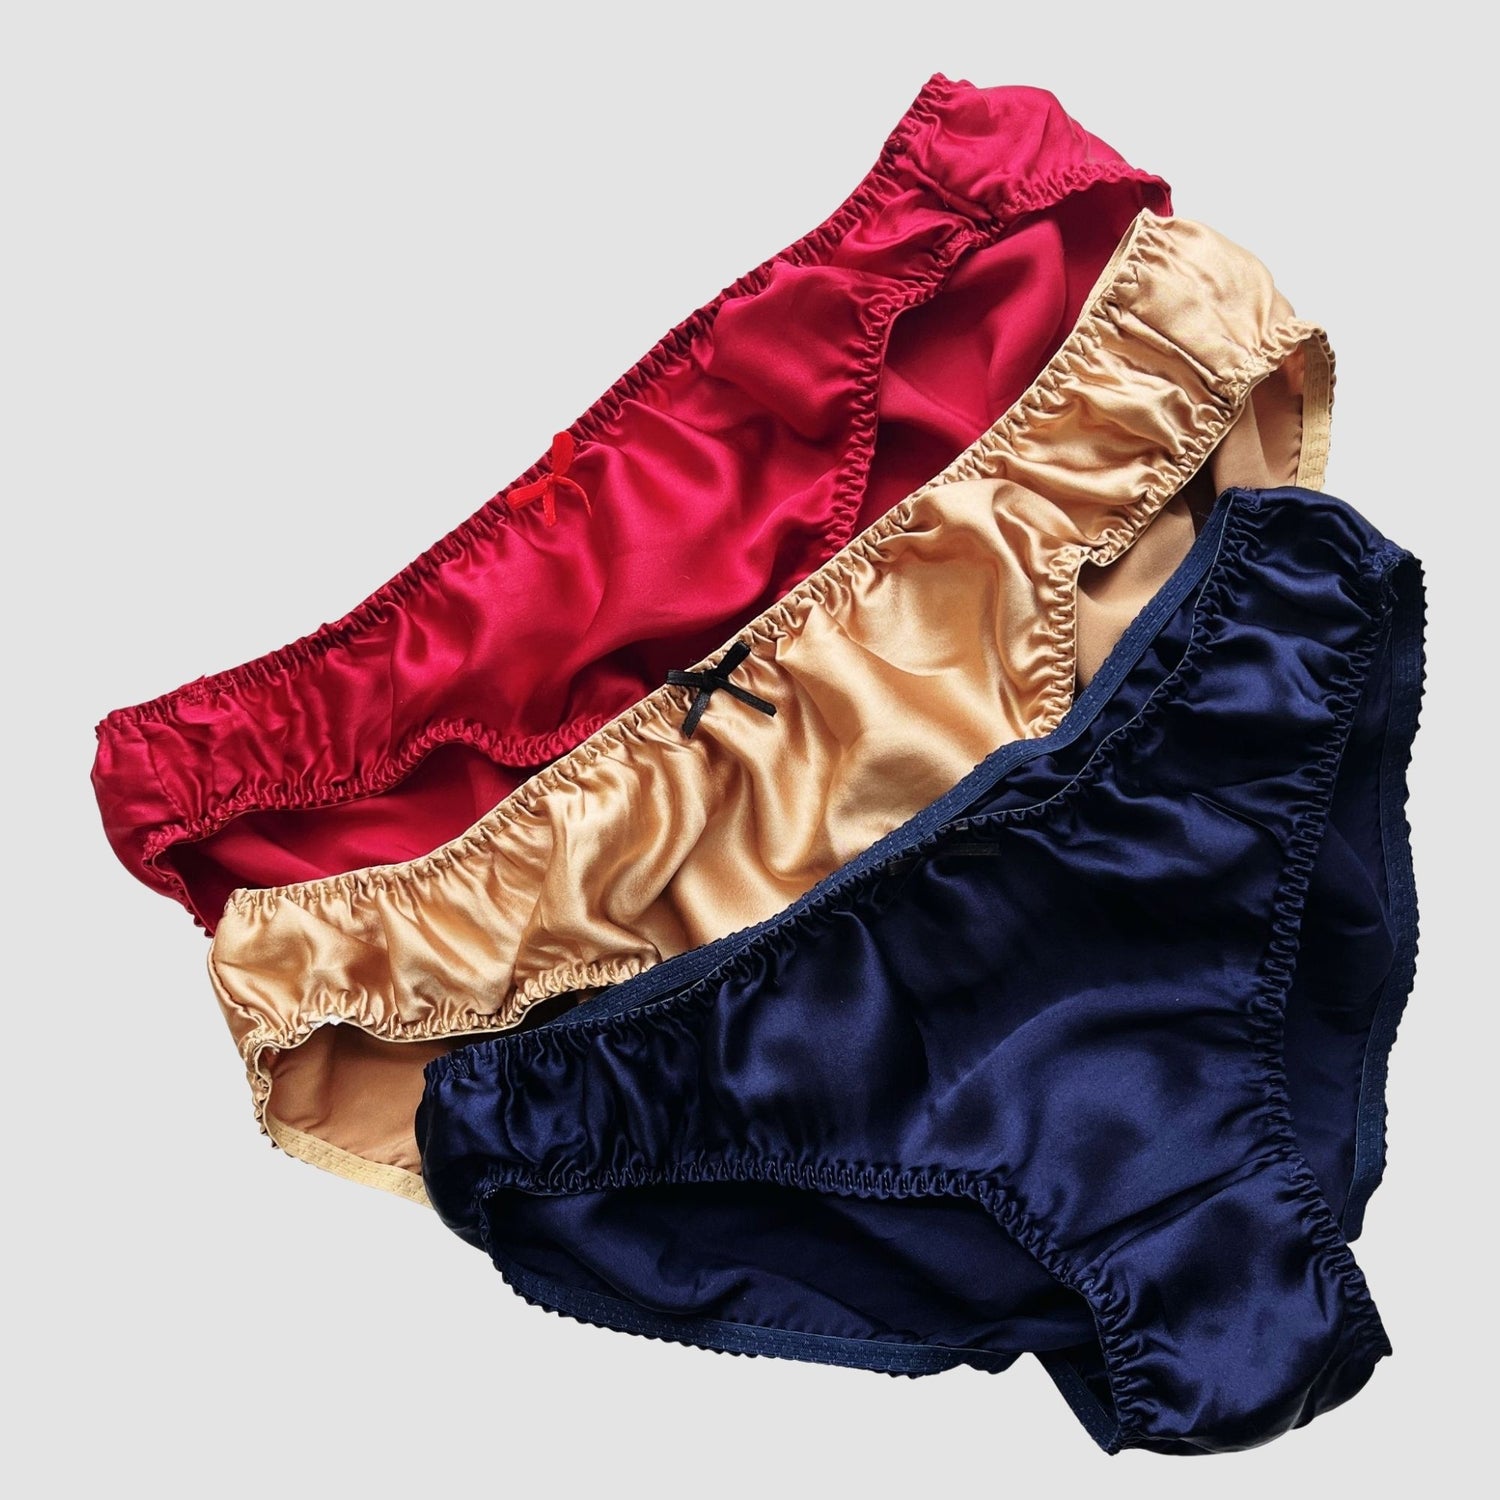 silk panties | Shop women's silk underwear and lingerie | Made in Canada 